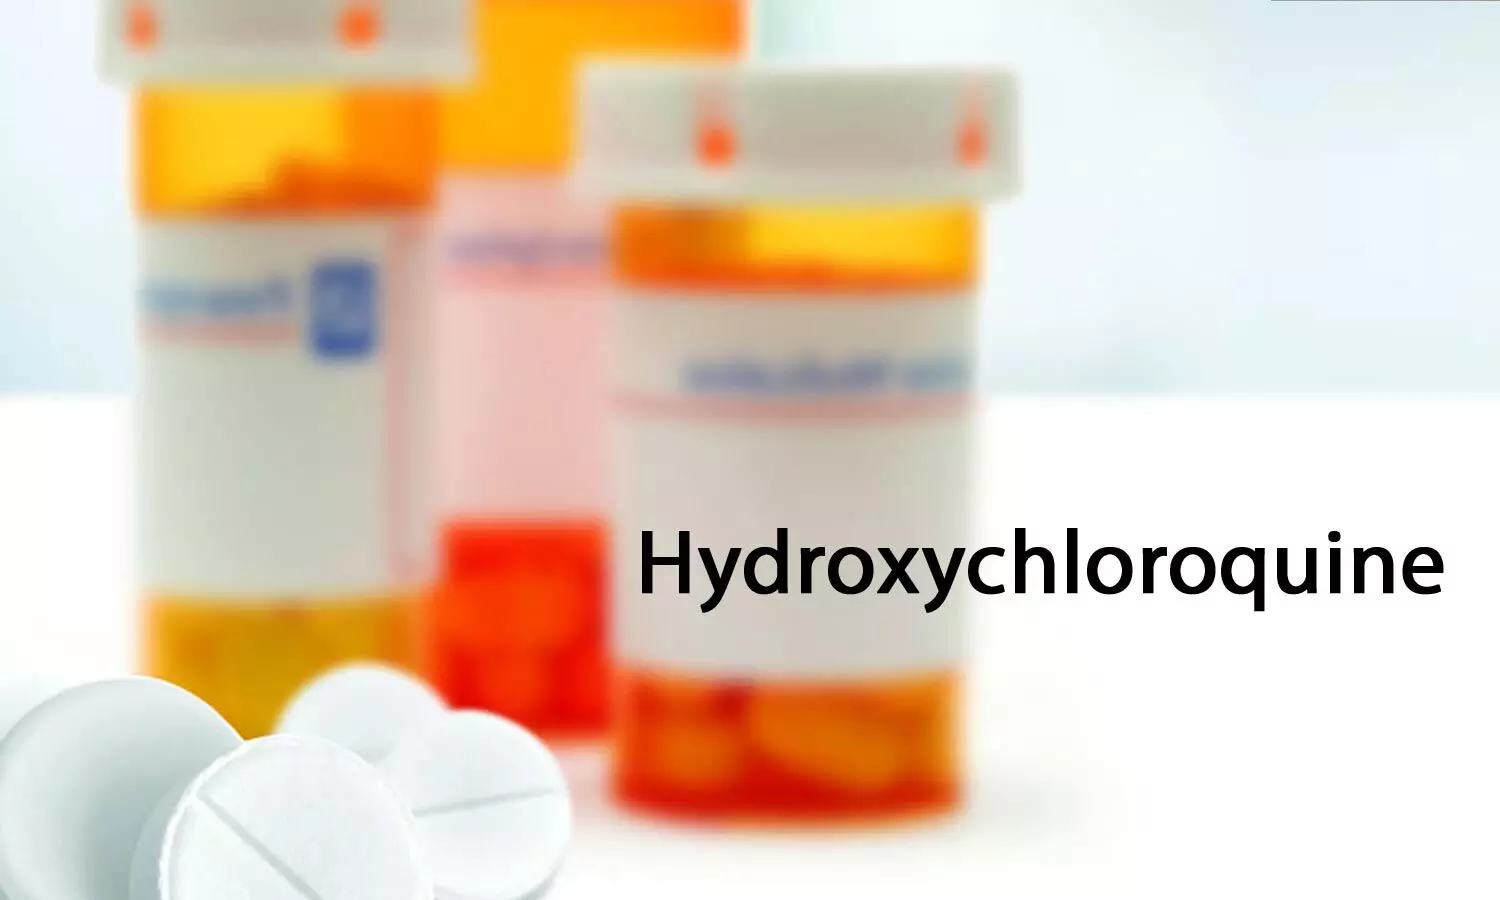 WHO warns against using hydroxychloroquine outside clinical trials